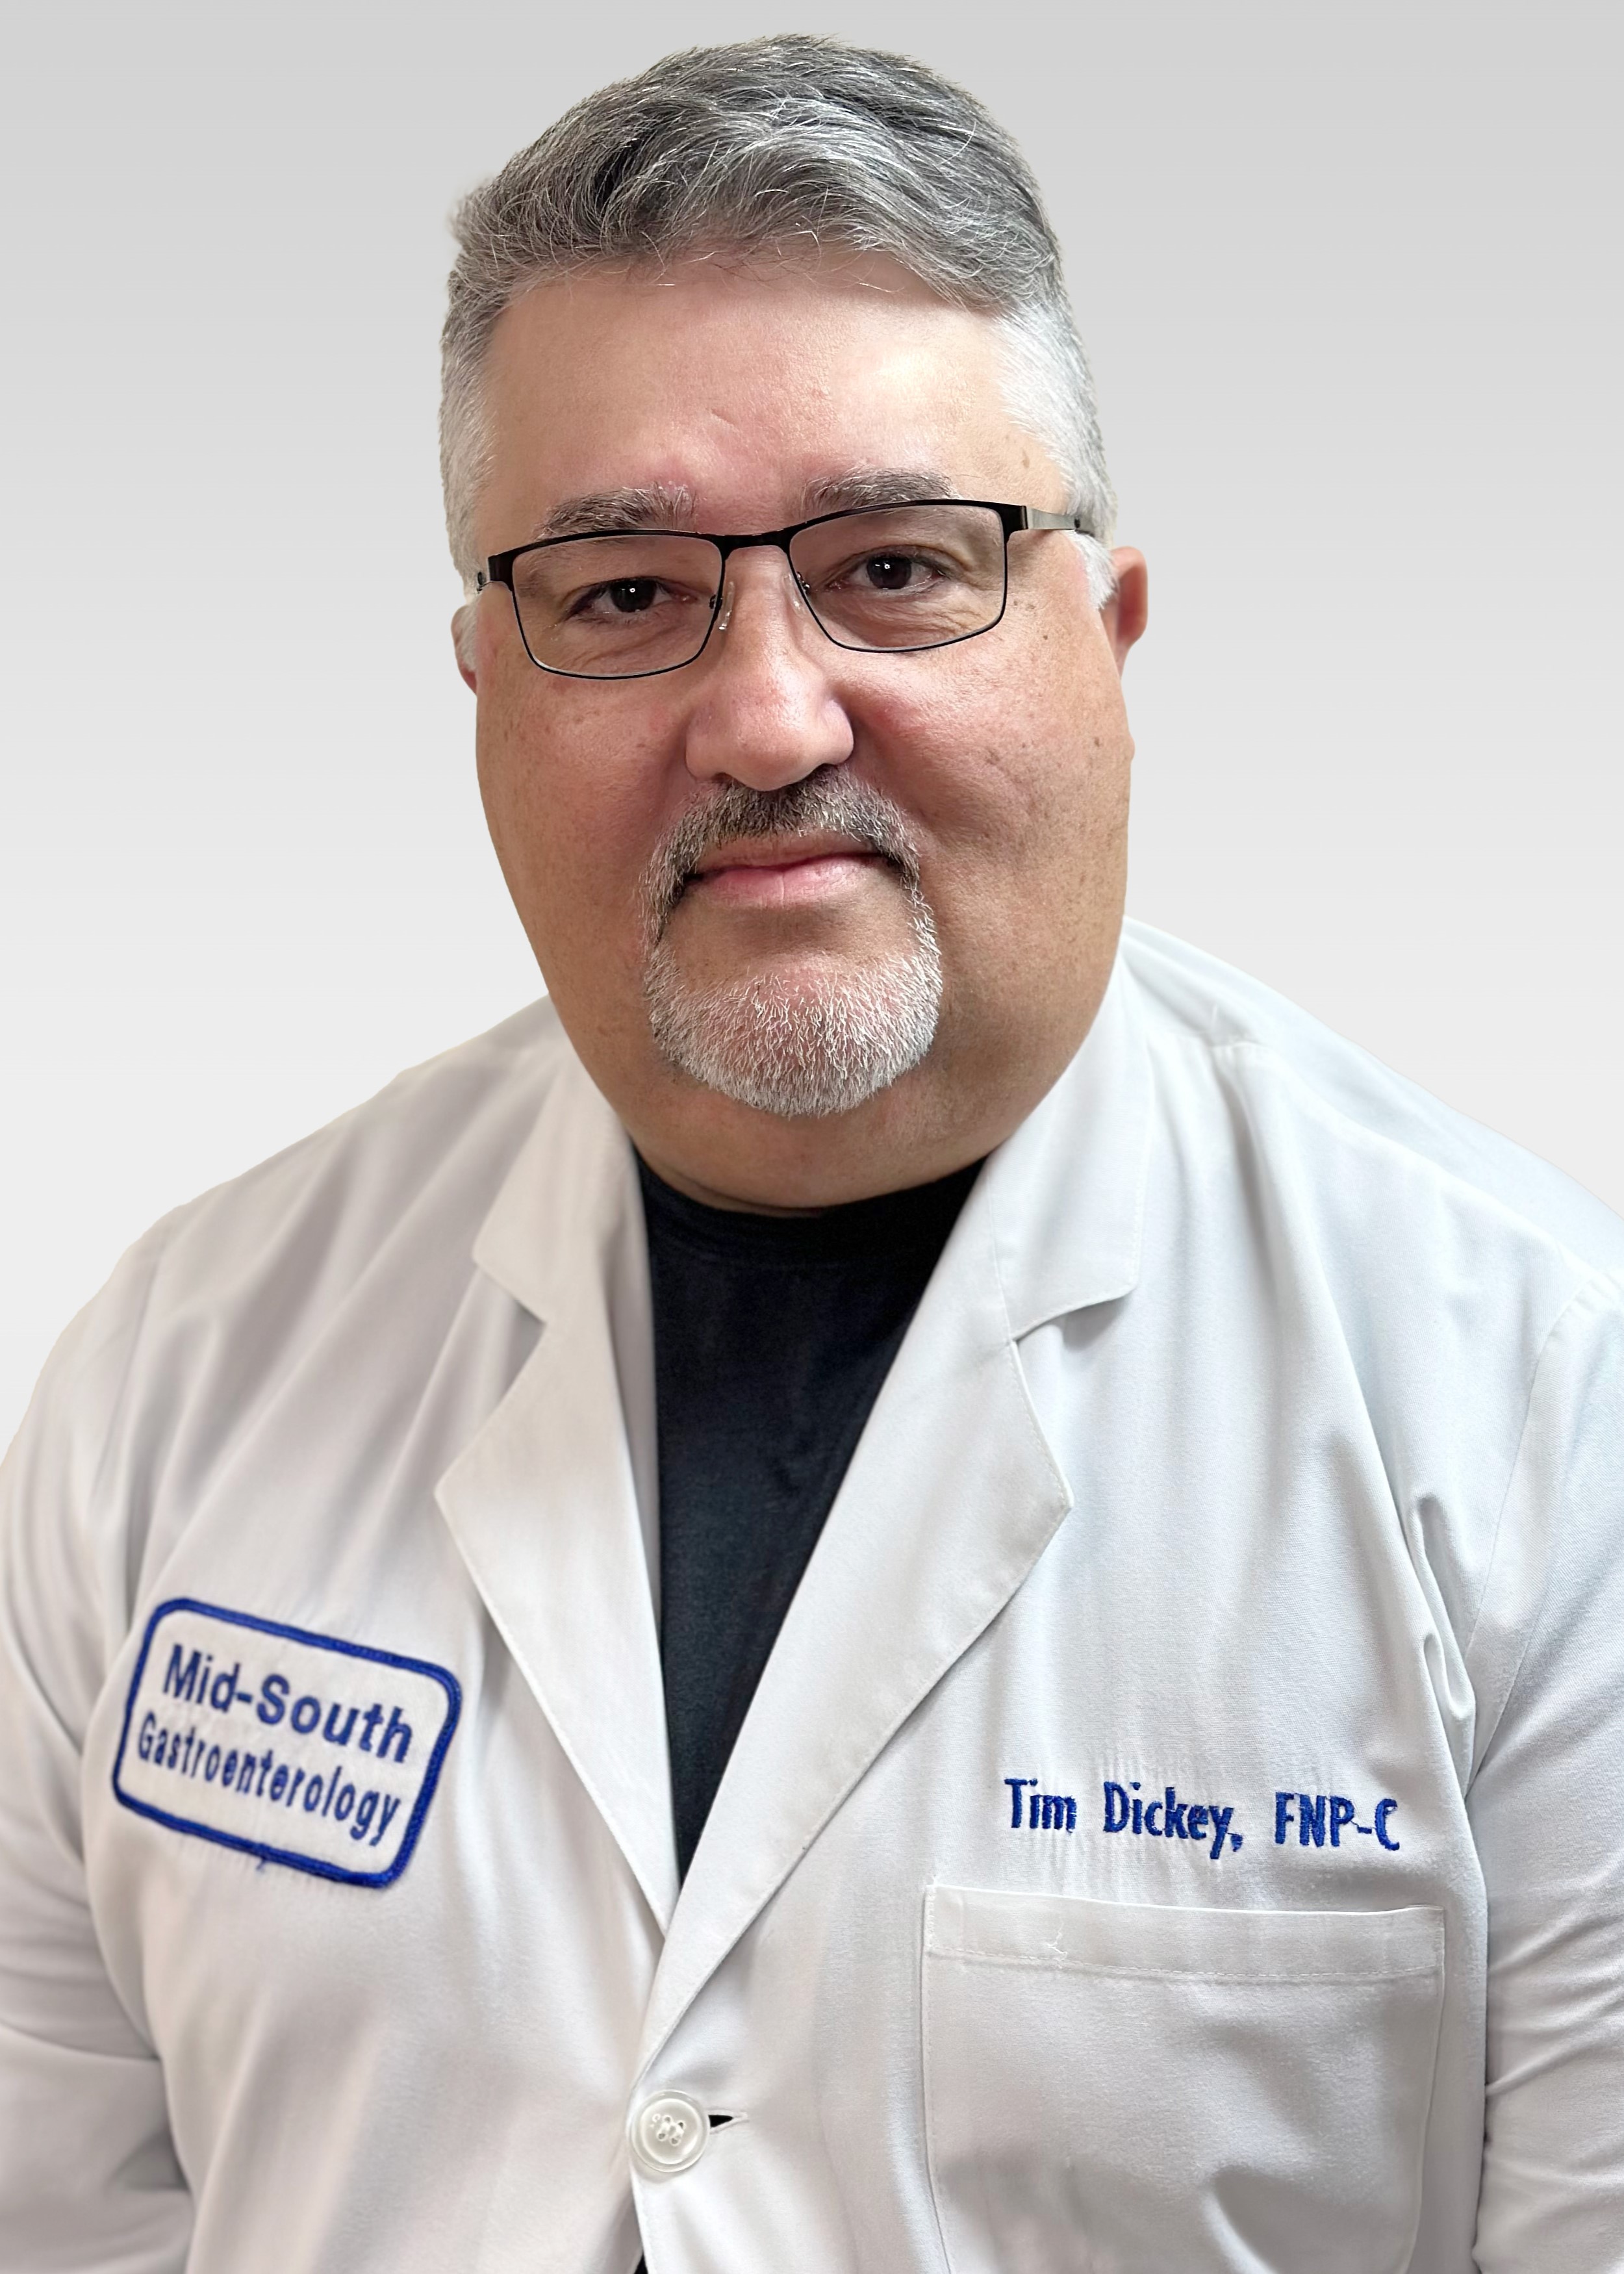 Dr. Timothy Dickey